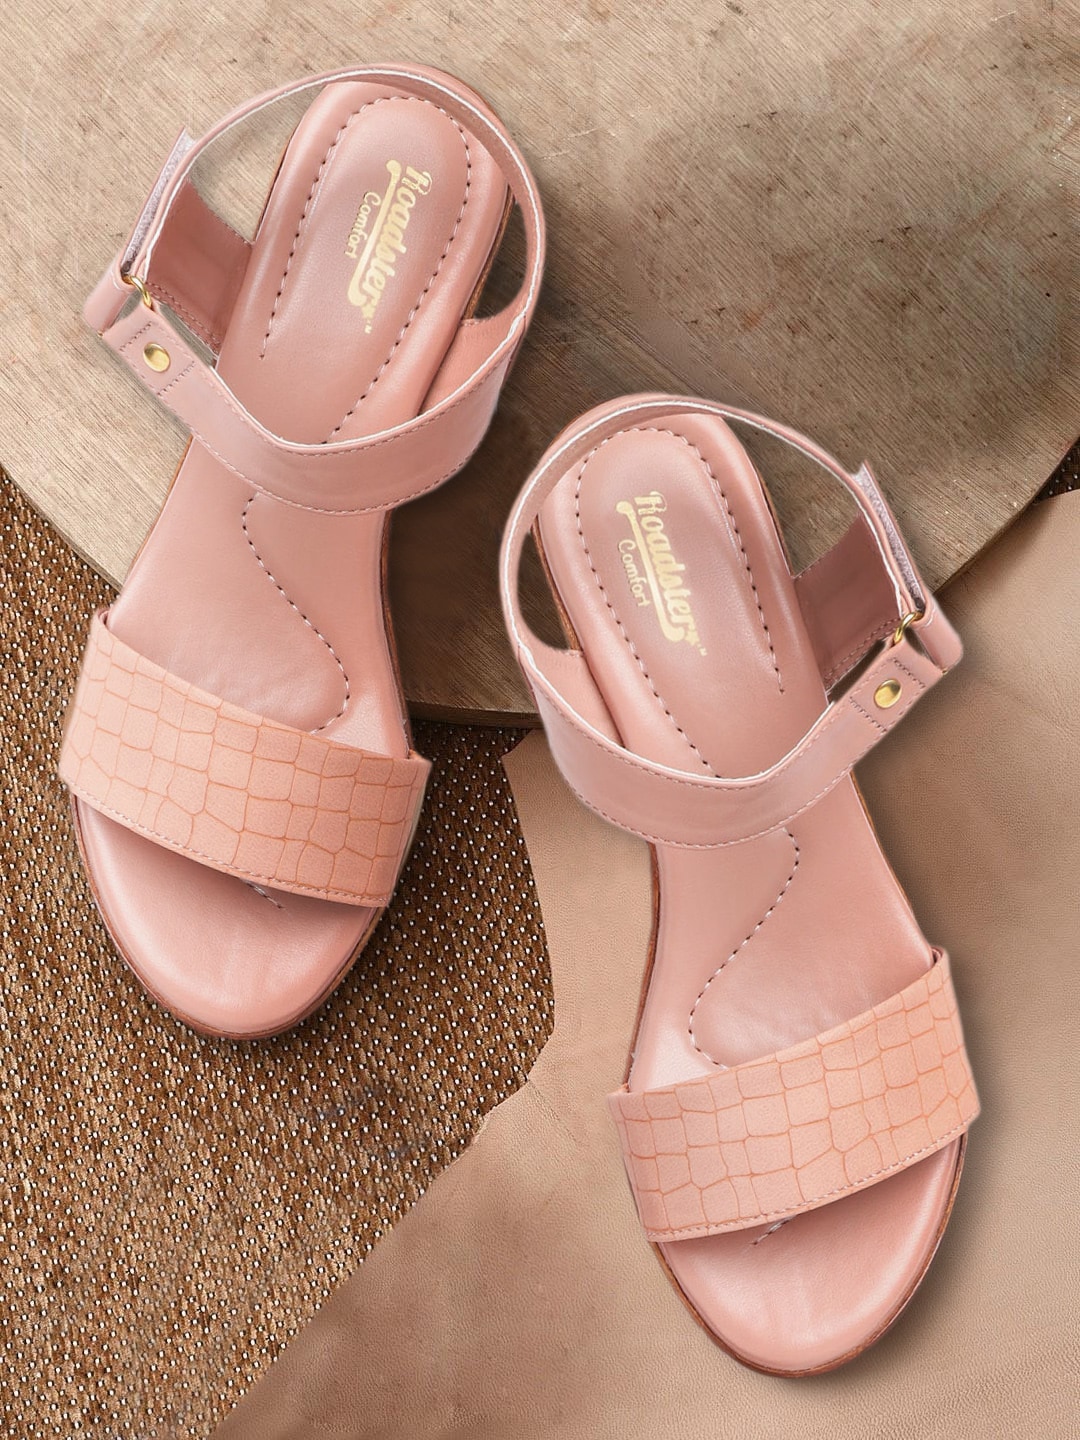 The Roadster Lifestyle Co Pink Croc Textured Wedges Price in India